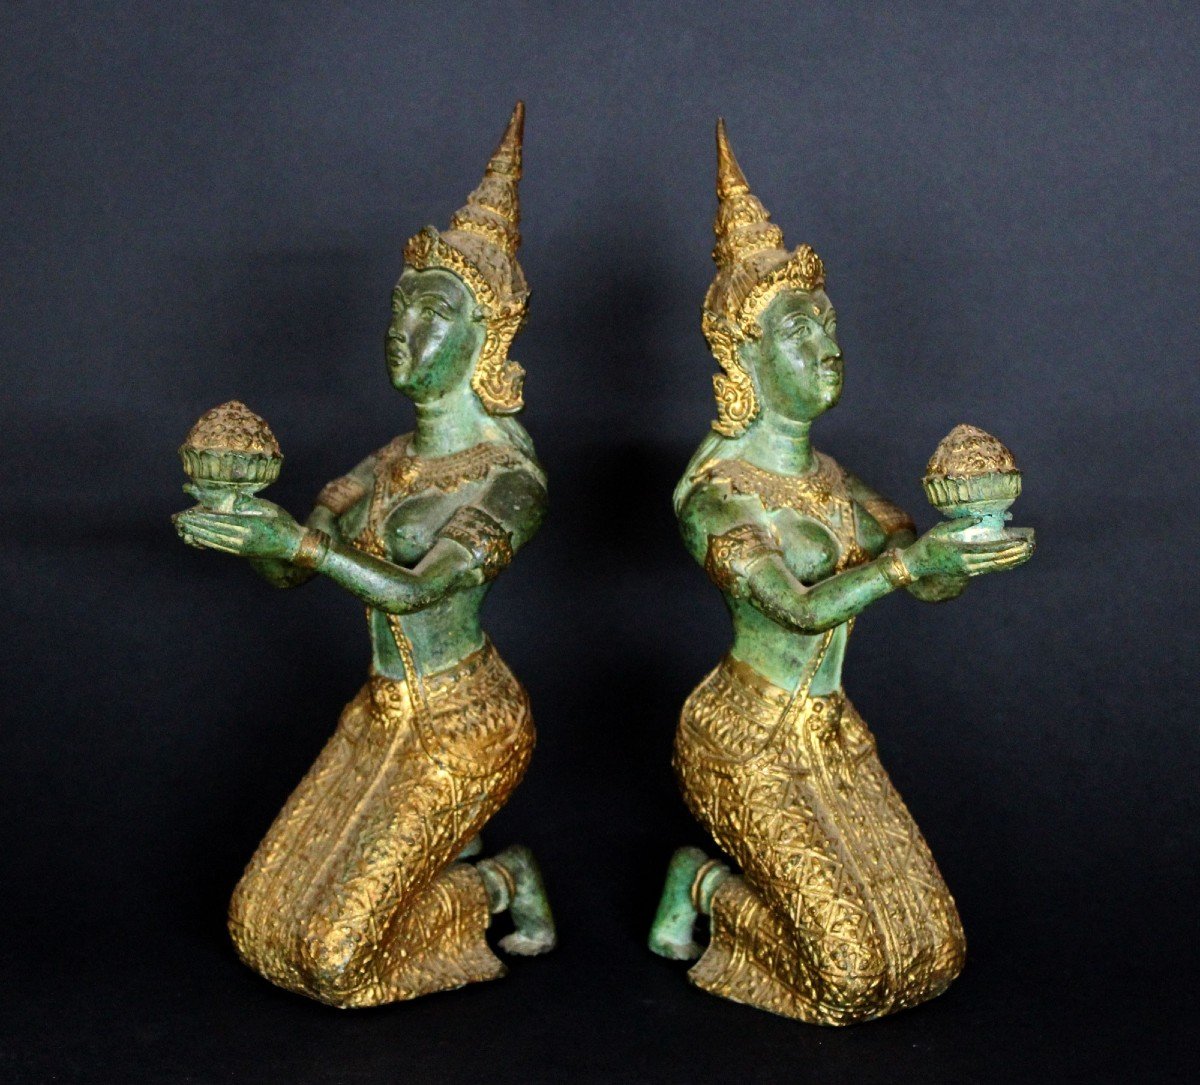 Pair Antique Thai Bronzes Statues Bearing Gifts Thephanom Buddhist Protectors And Guardians-photo-2